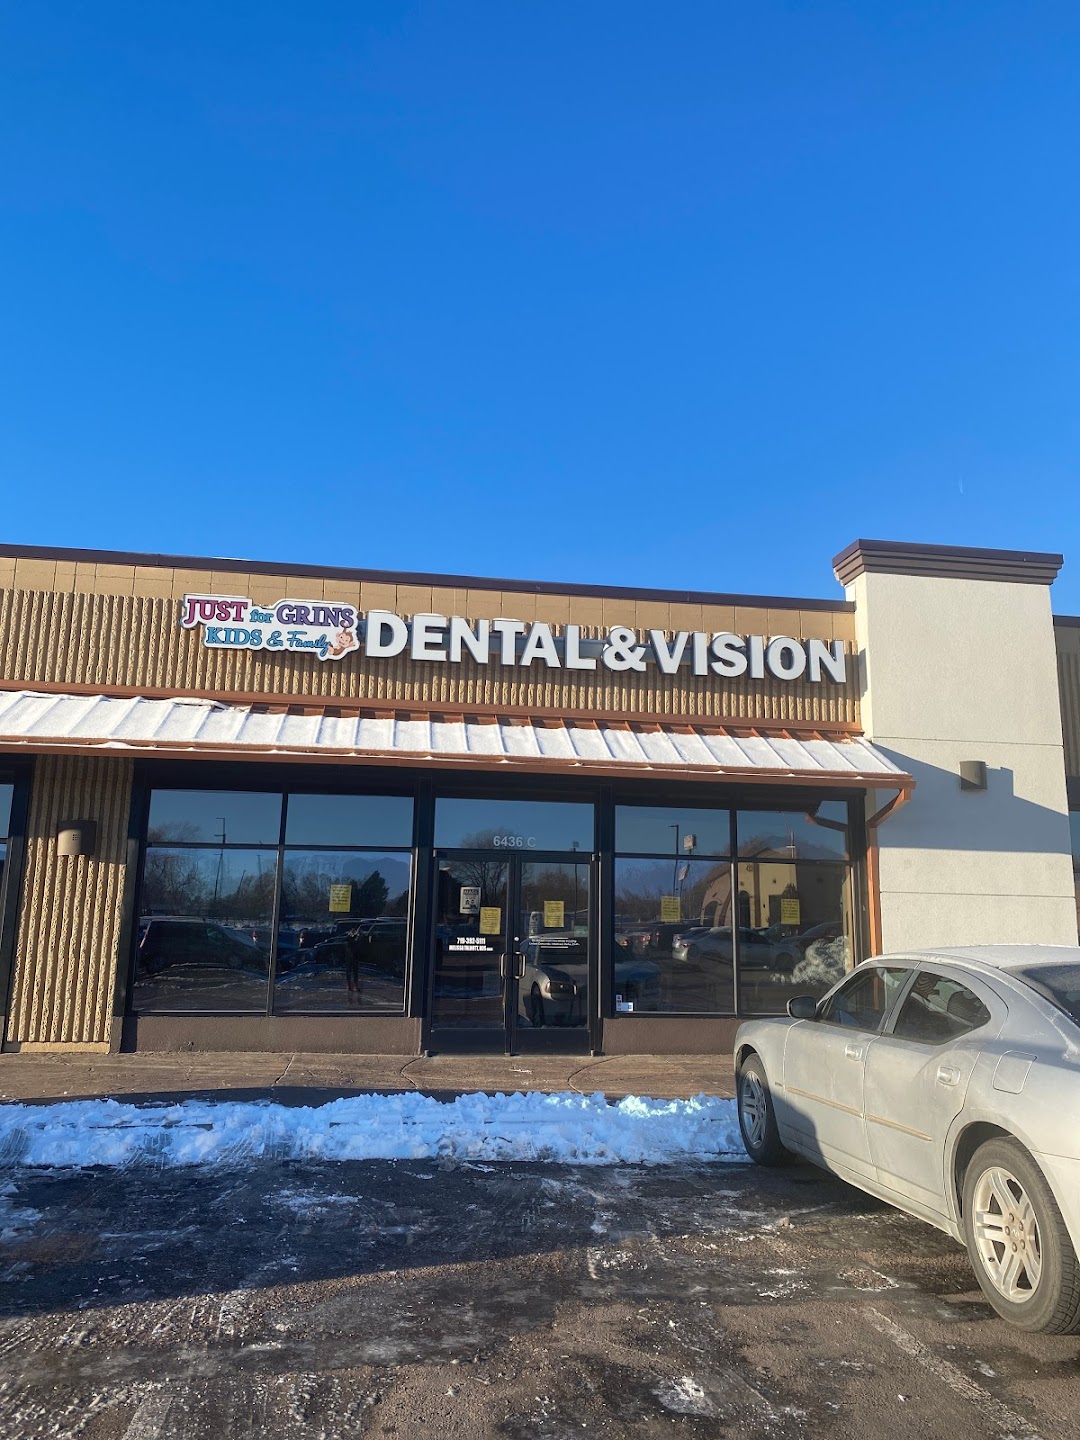 Just For Grins Kids and Family Dental And Vision- FOUNTAIN